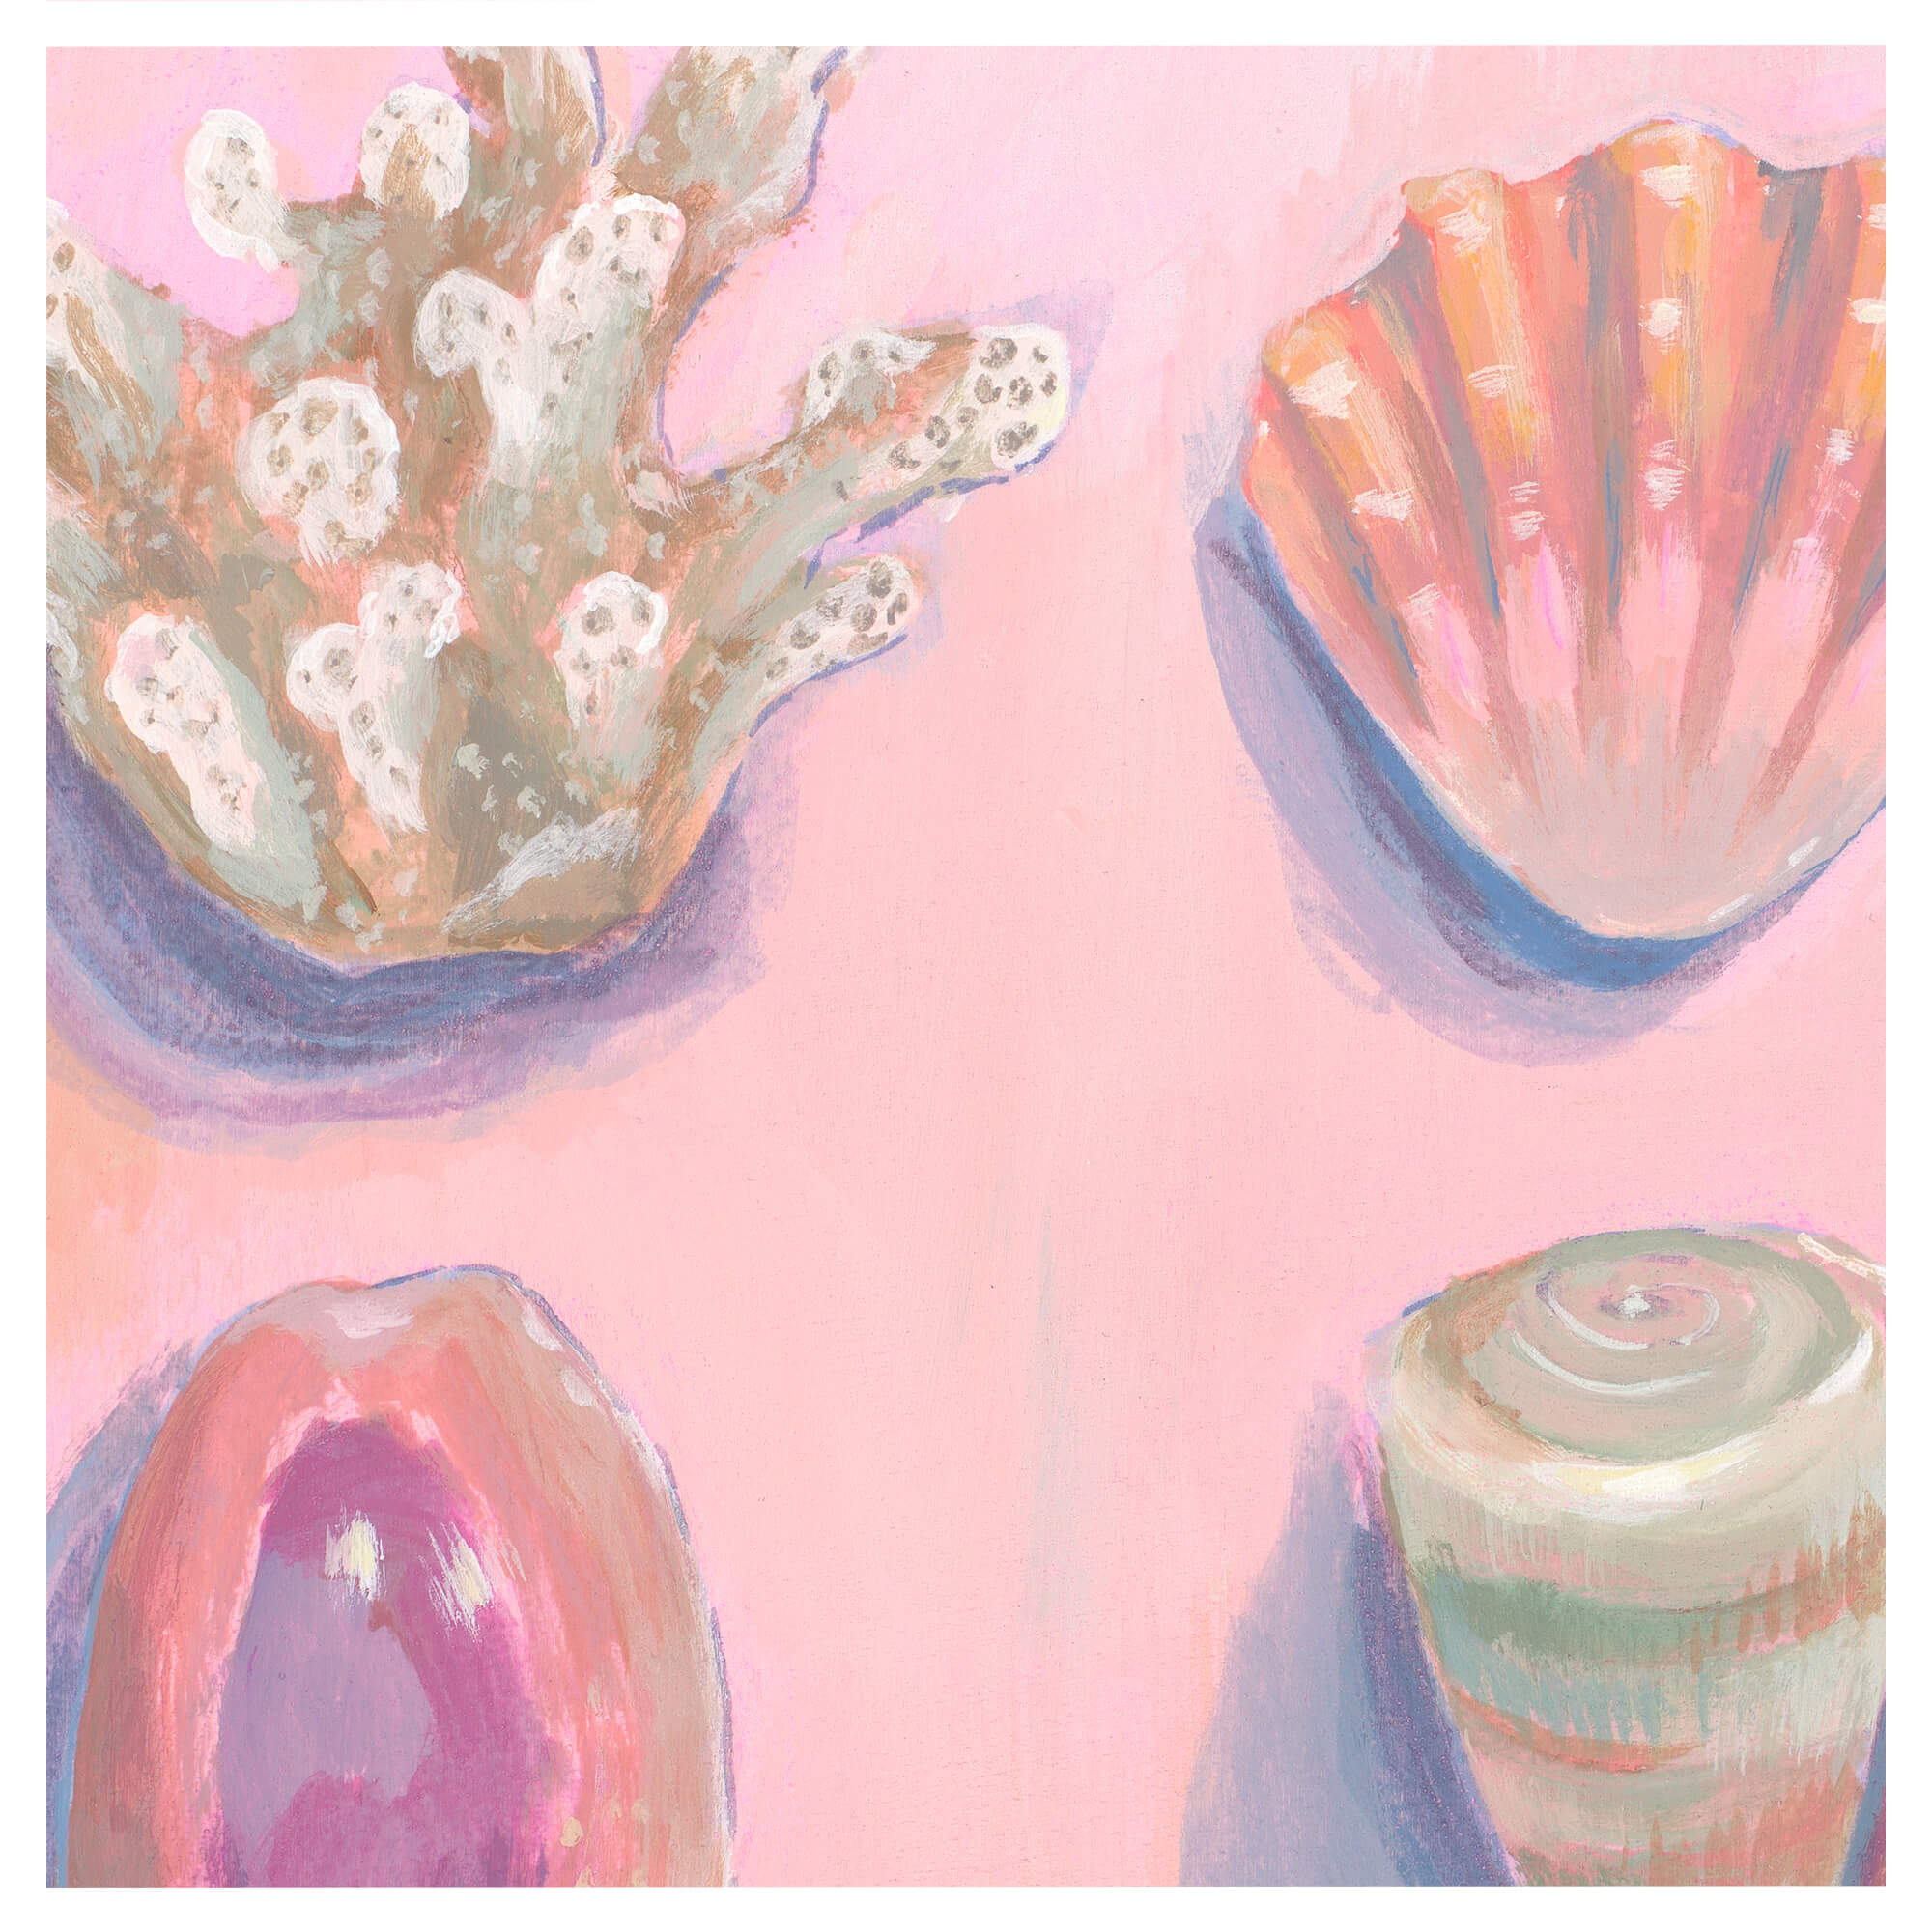 Beautiful depiction of different kinds of seashells by Hawaii artist Lindsay Wilkins